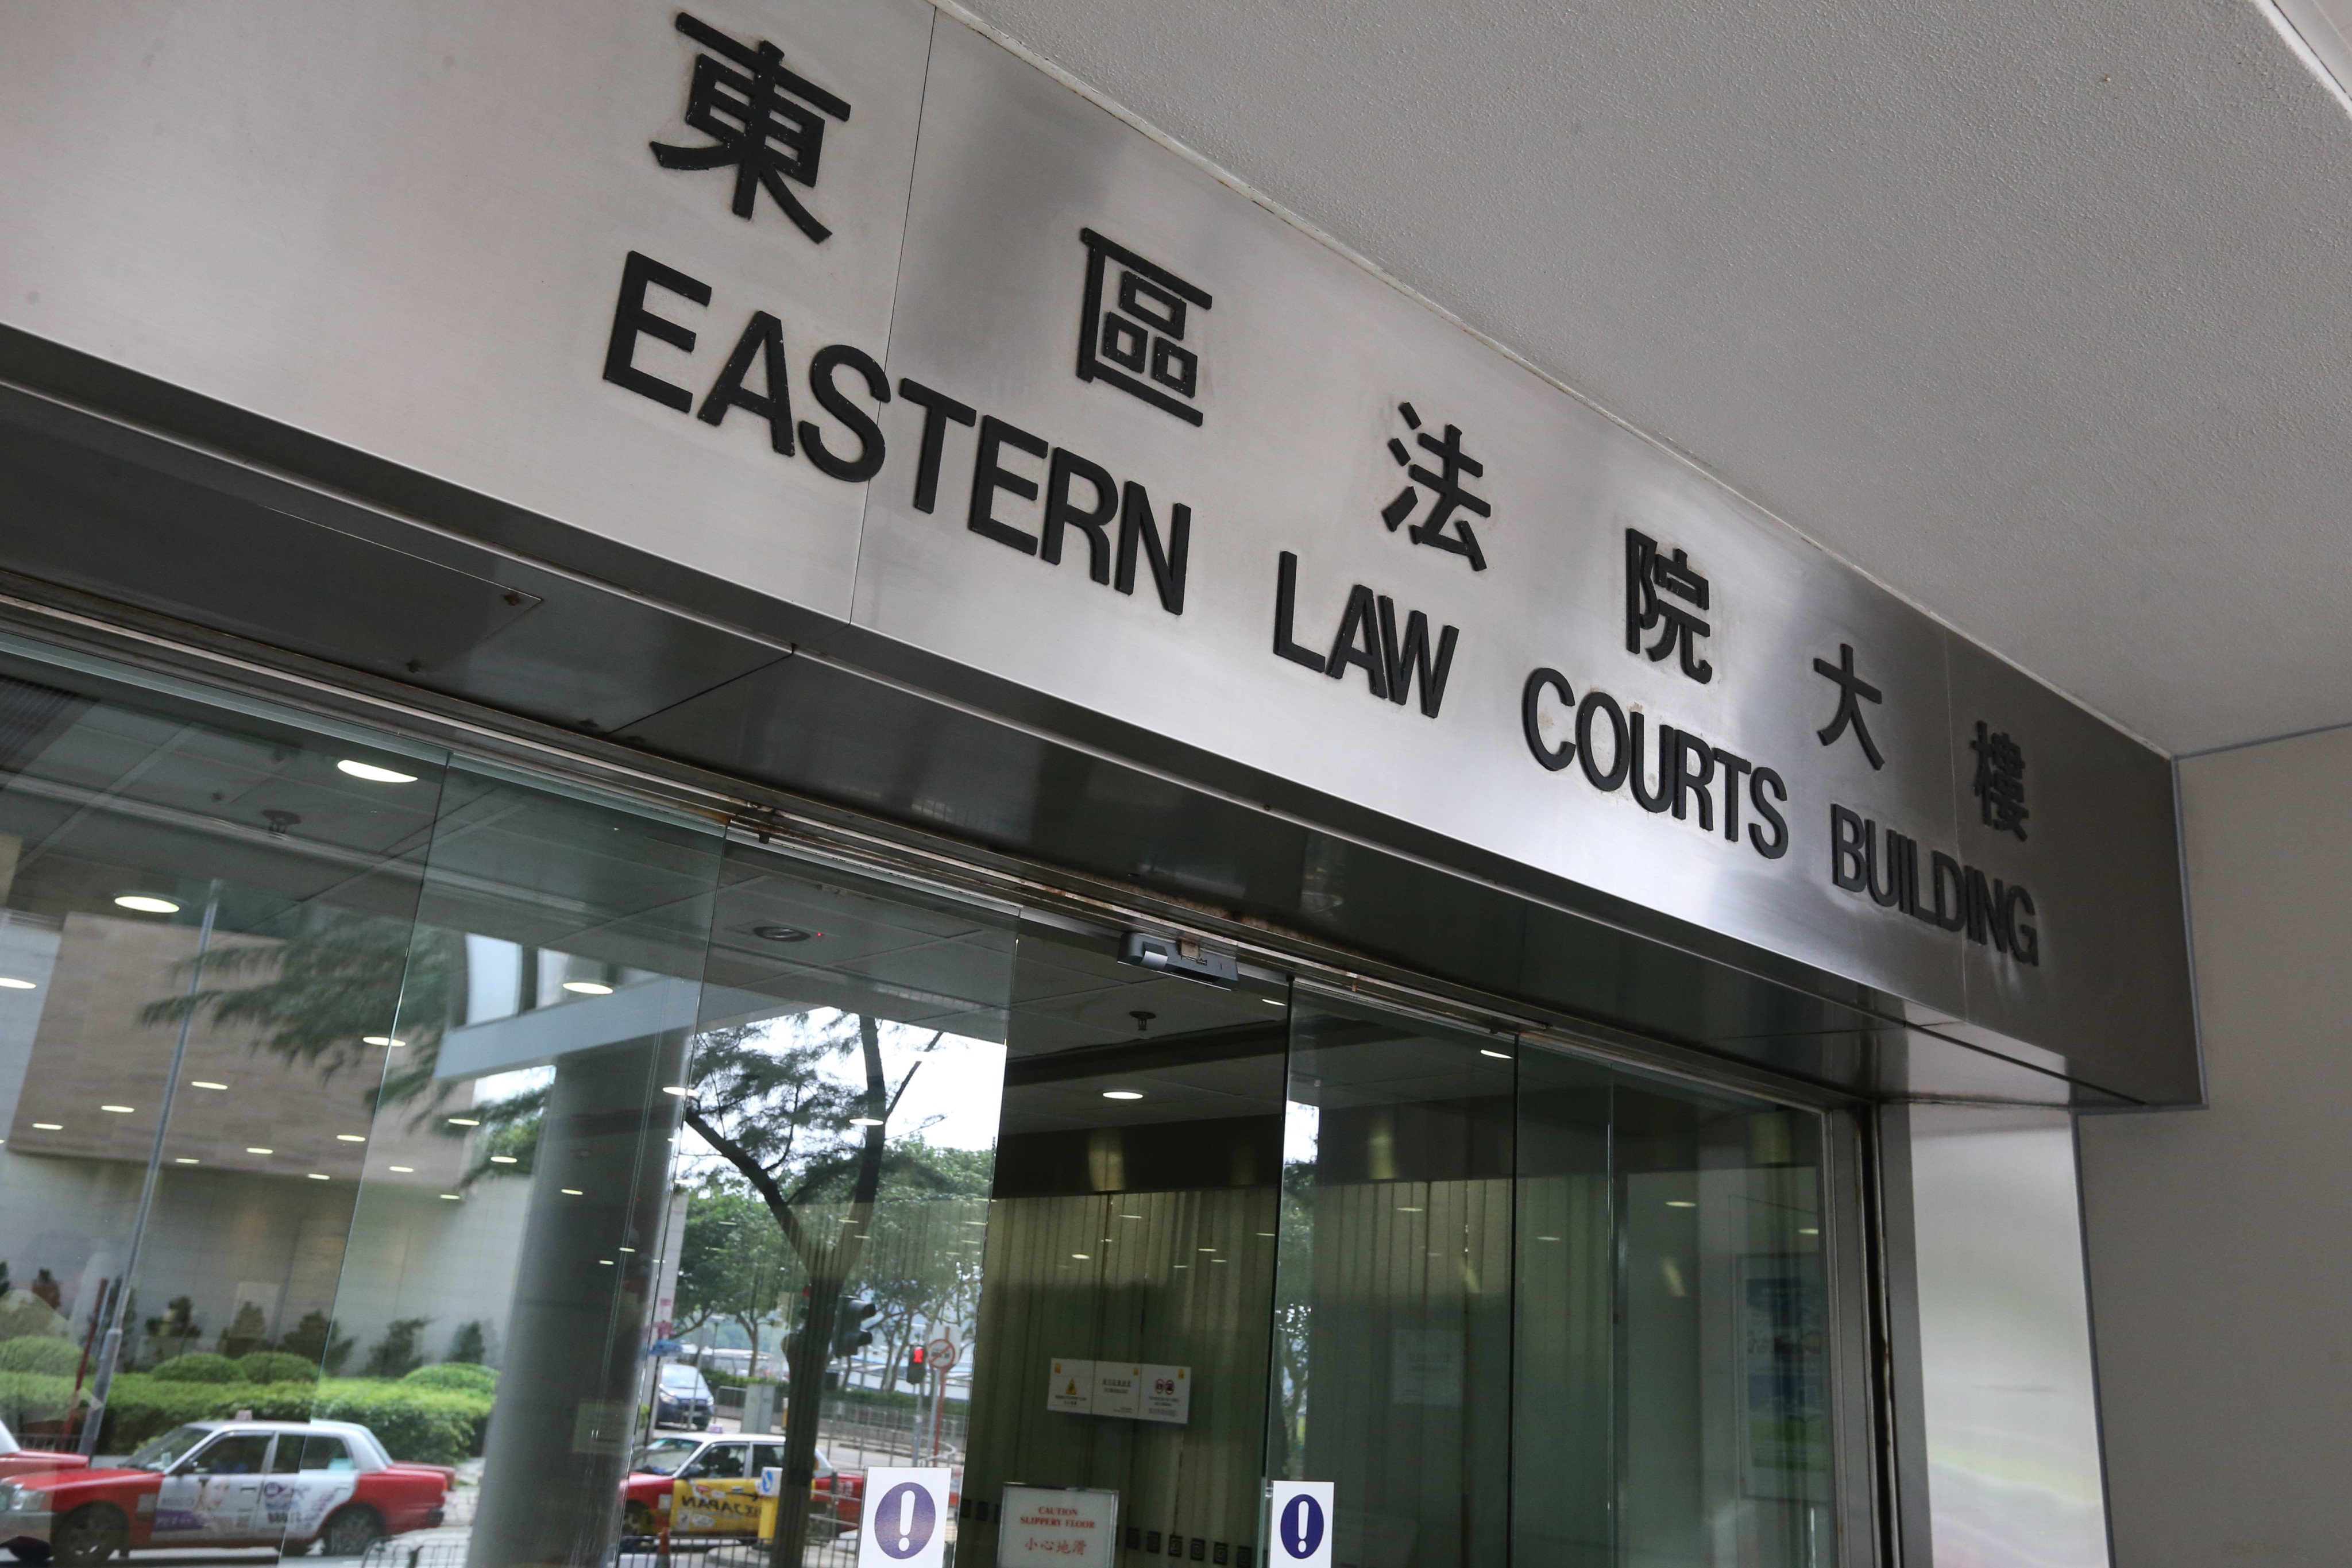 Bail conditions requiring the defendant not to contact the victim and his elder sister, or return to the centre. Photo: SCMP